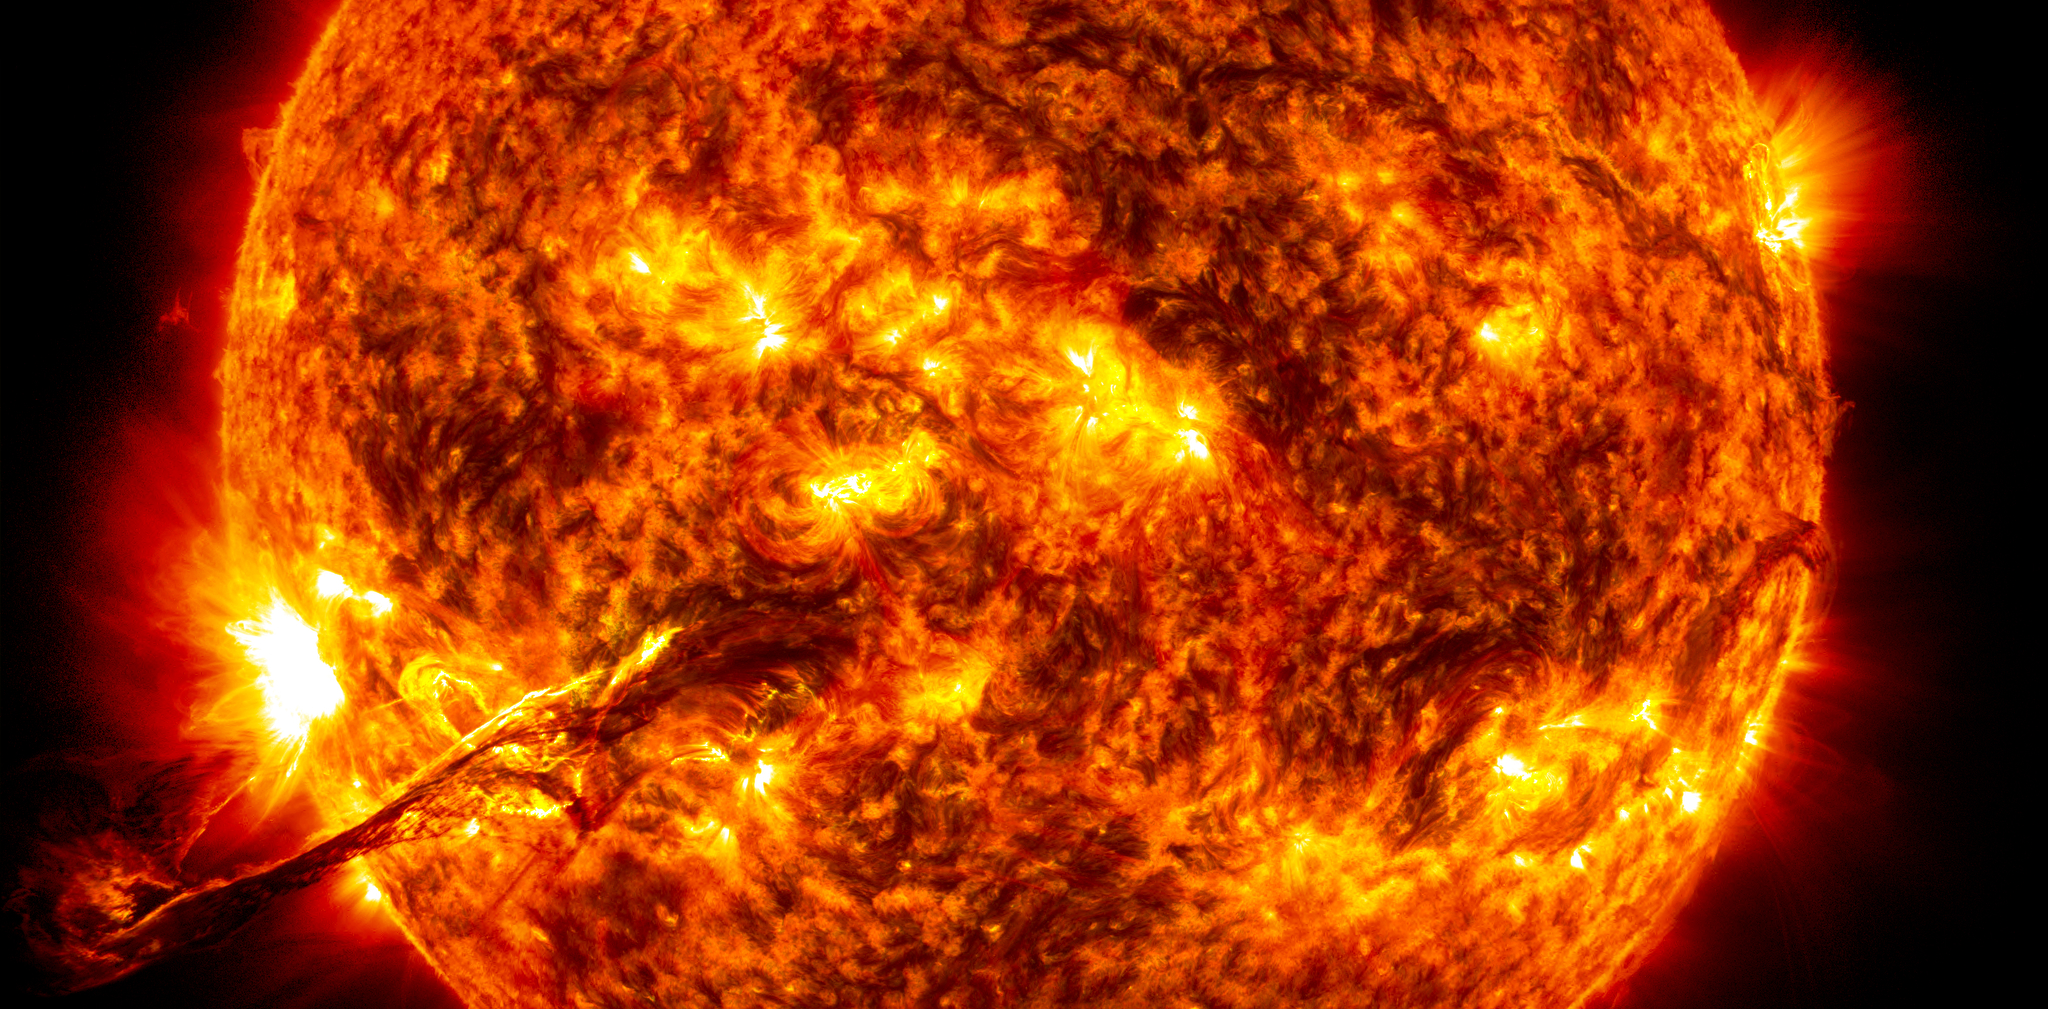 Image of the sun with a flare